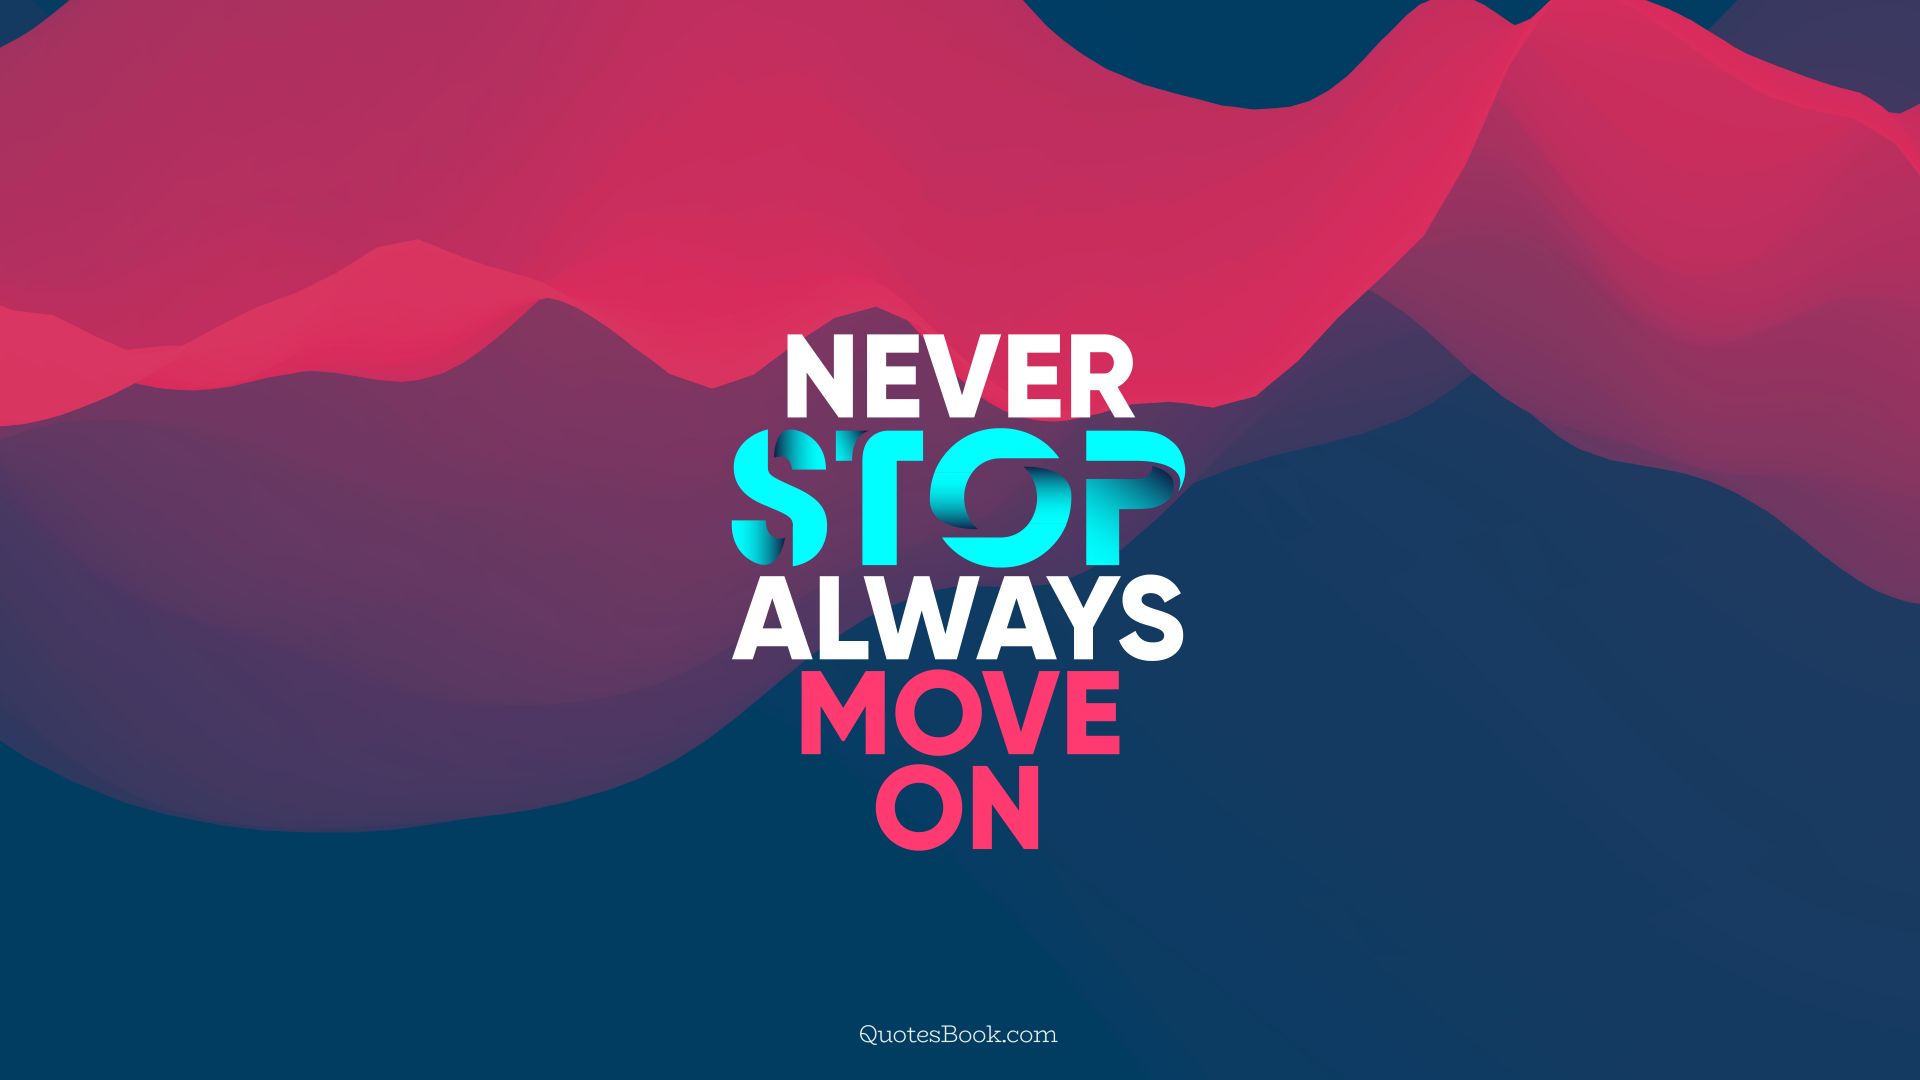 Never stop, always move on